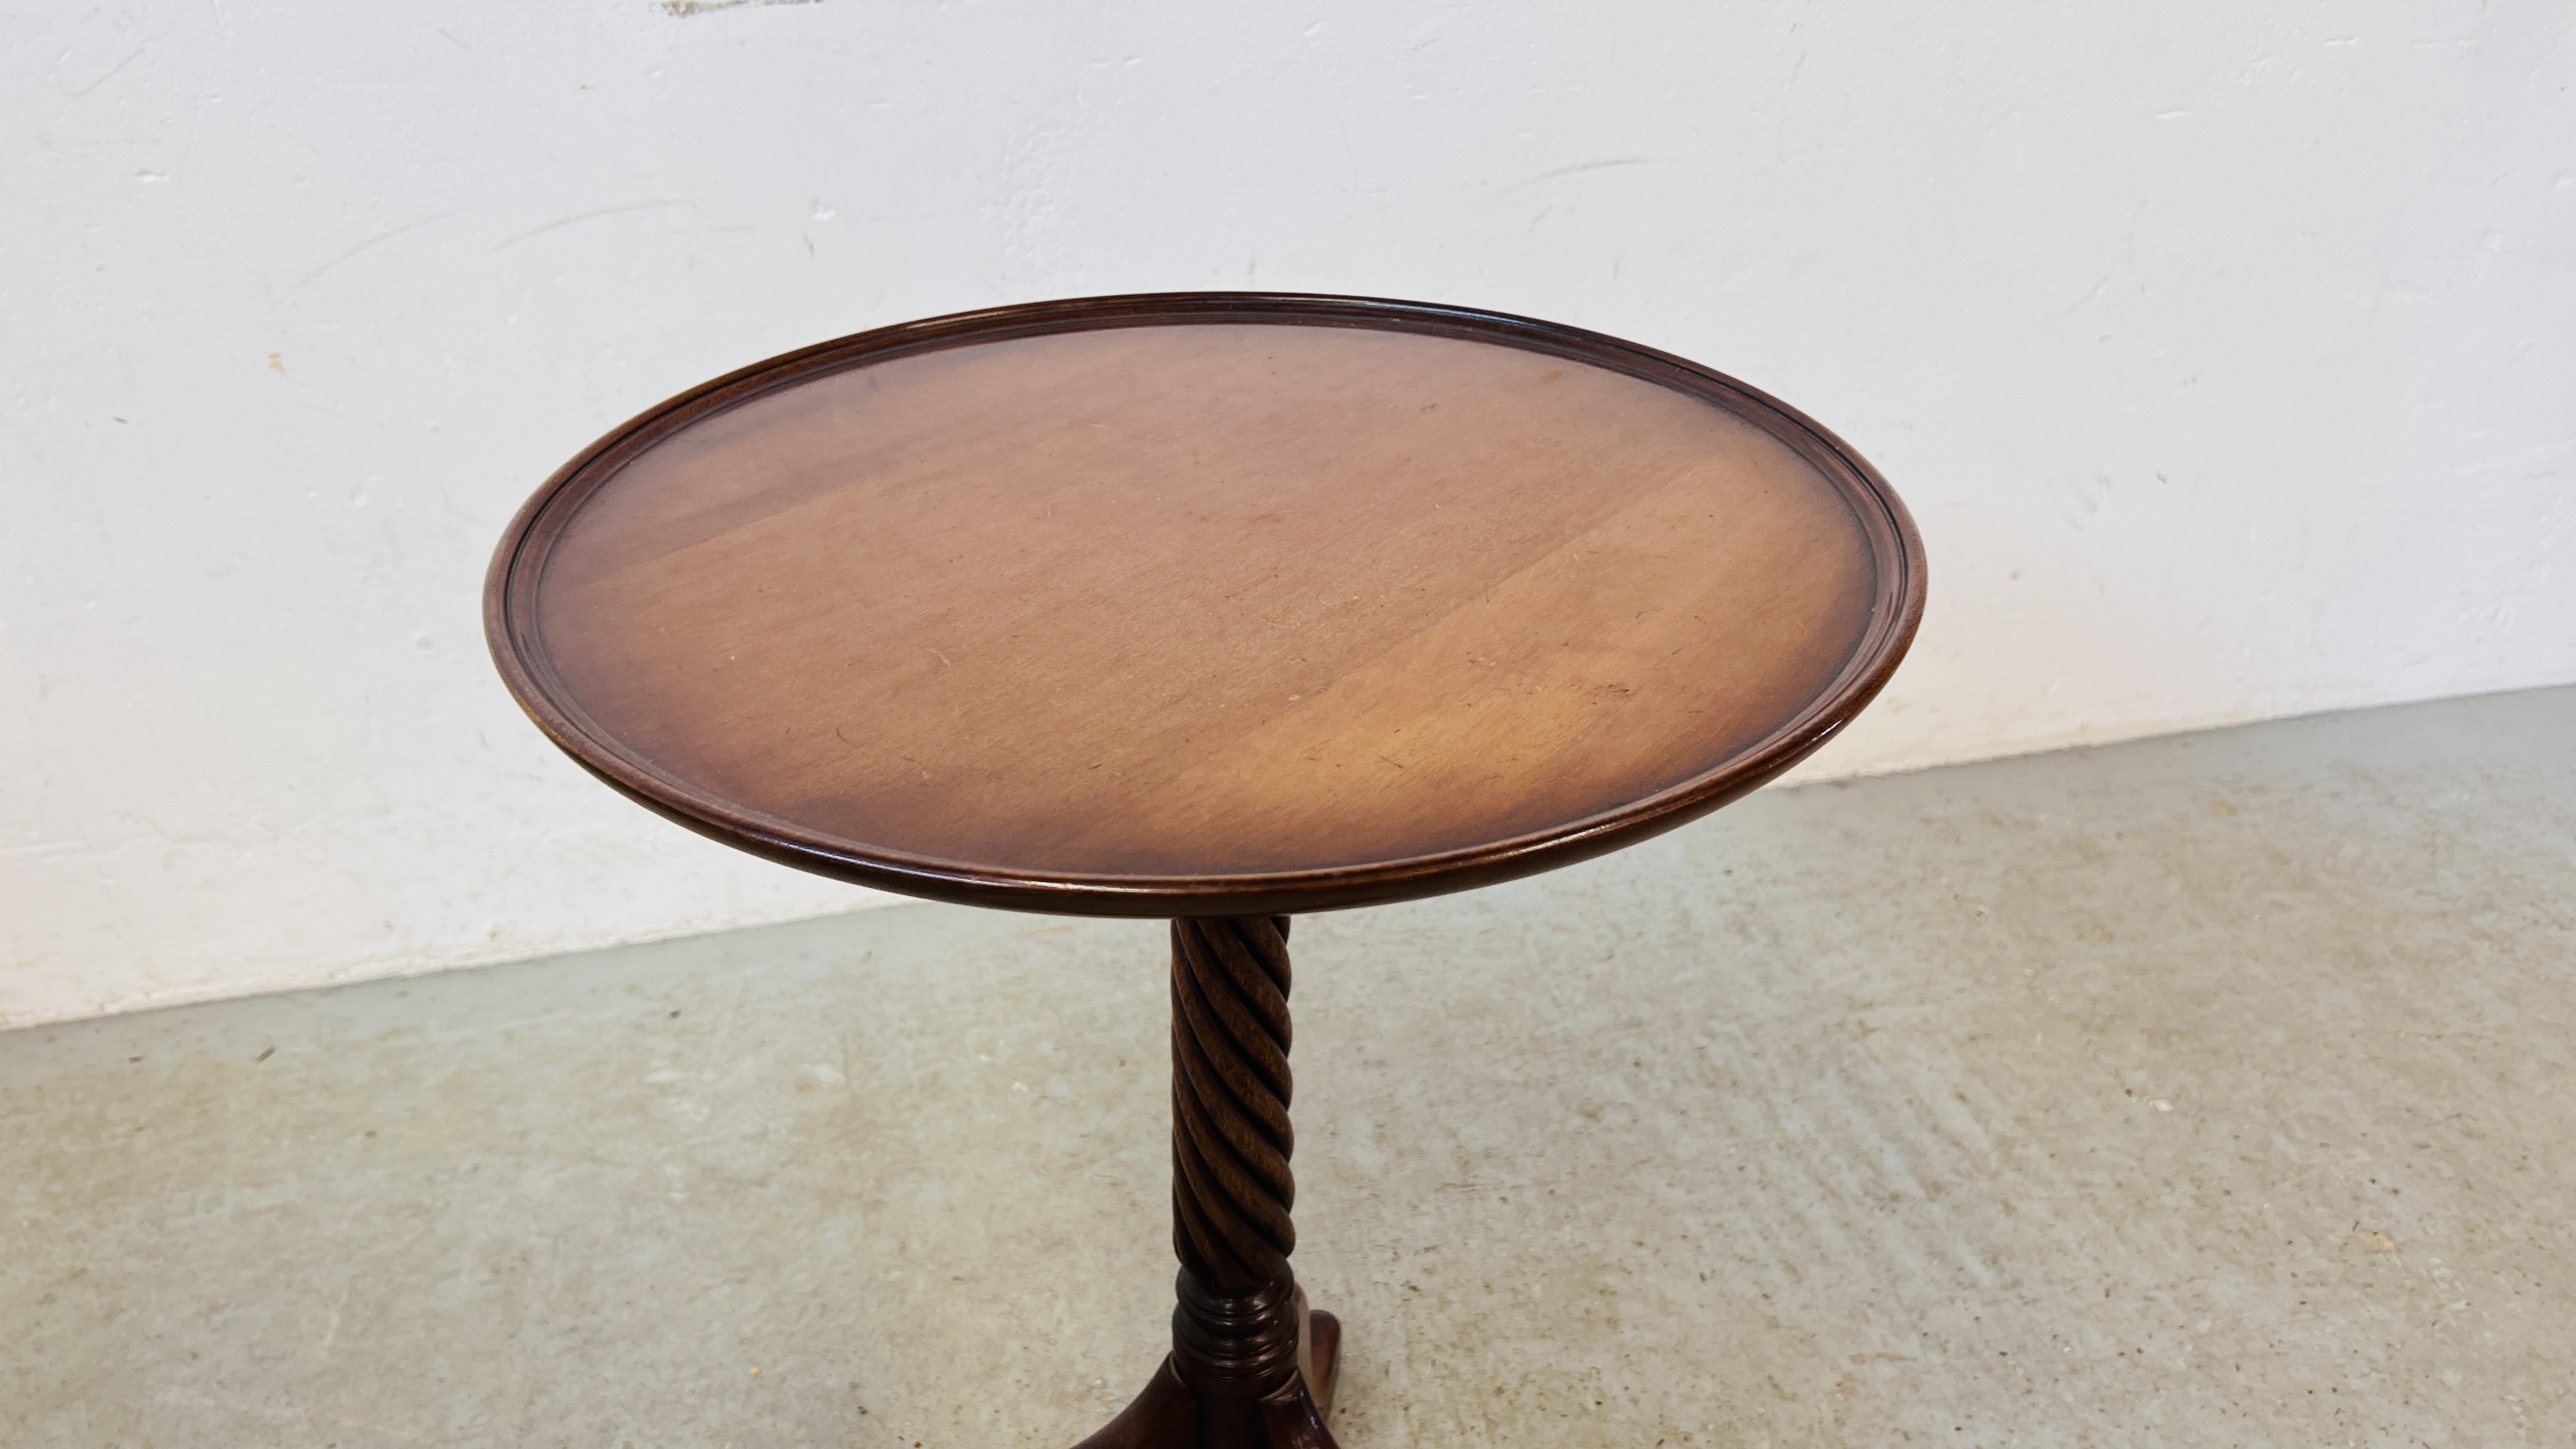 TWO GOOD QUALITY REPRODUCTION MAHOGANY PEDESTAL WINE TABLES, ONE WITH RIVEN COLUMN DETAIL. - Image 7 of 8